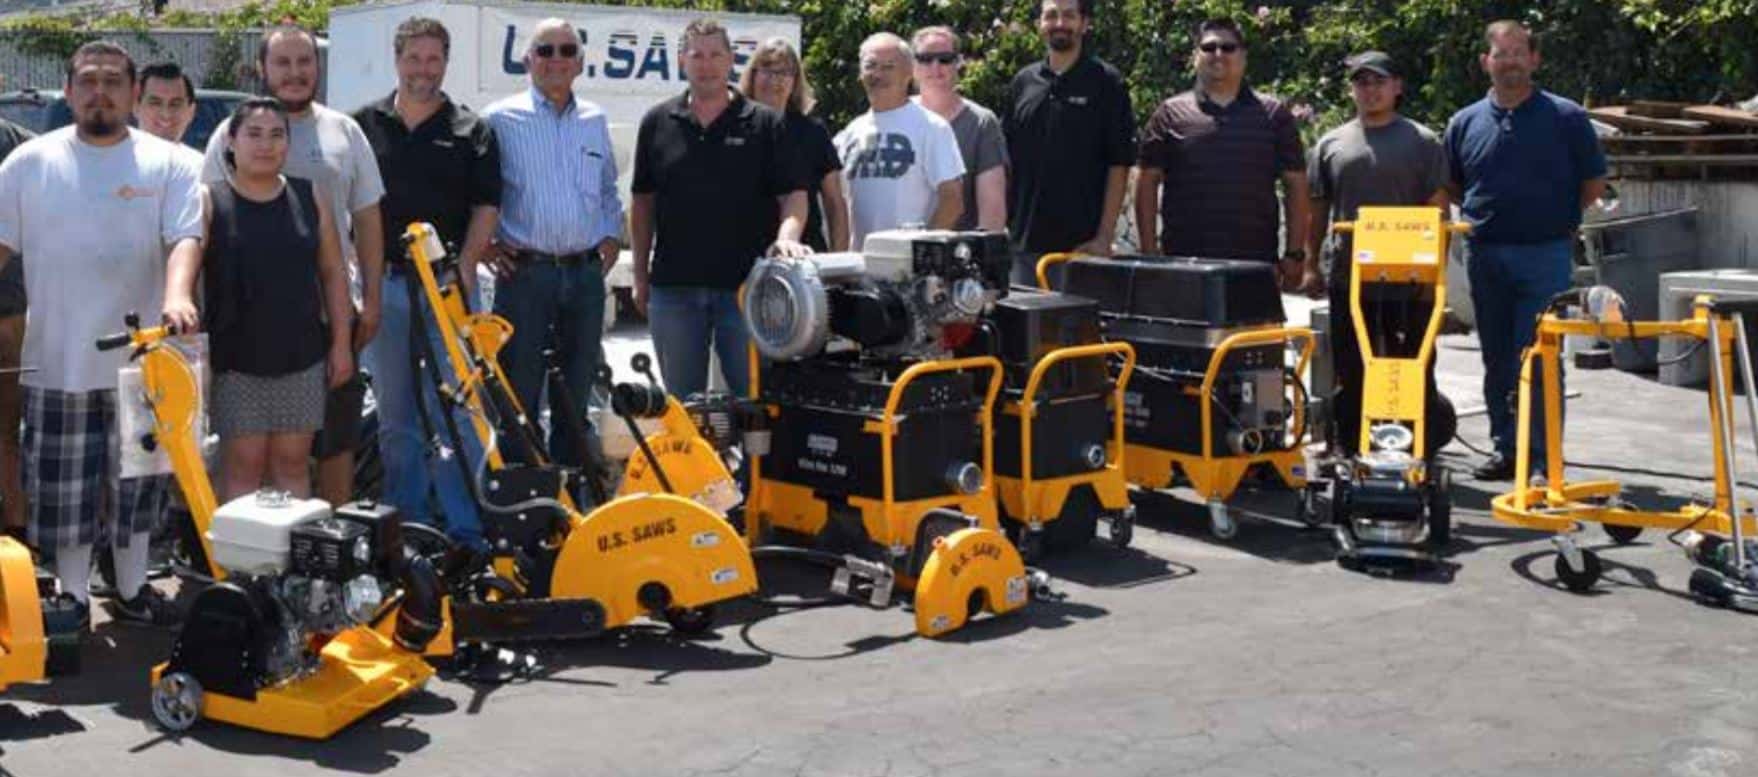 U.S.SAWS: Coast-To-Coast Experts in Specialty Tools